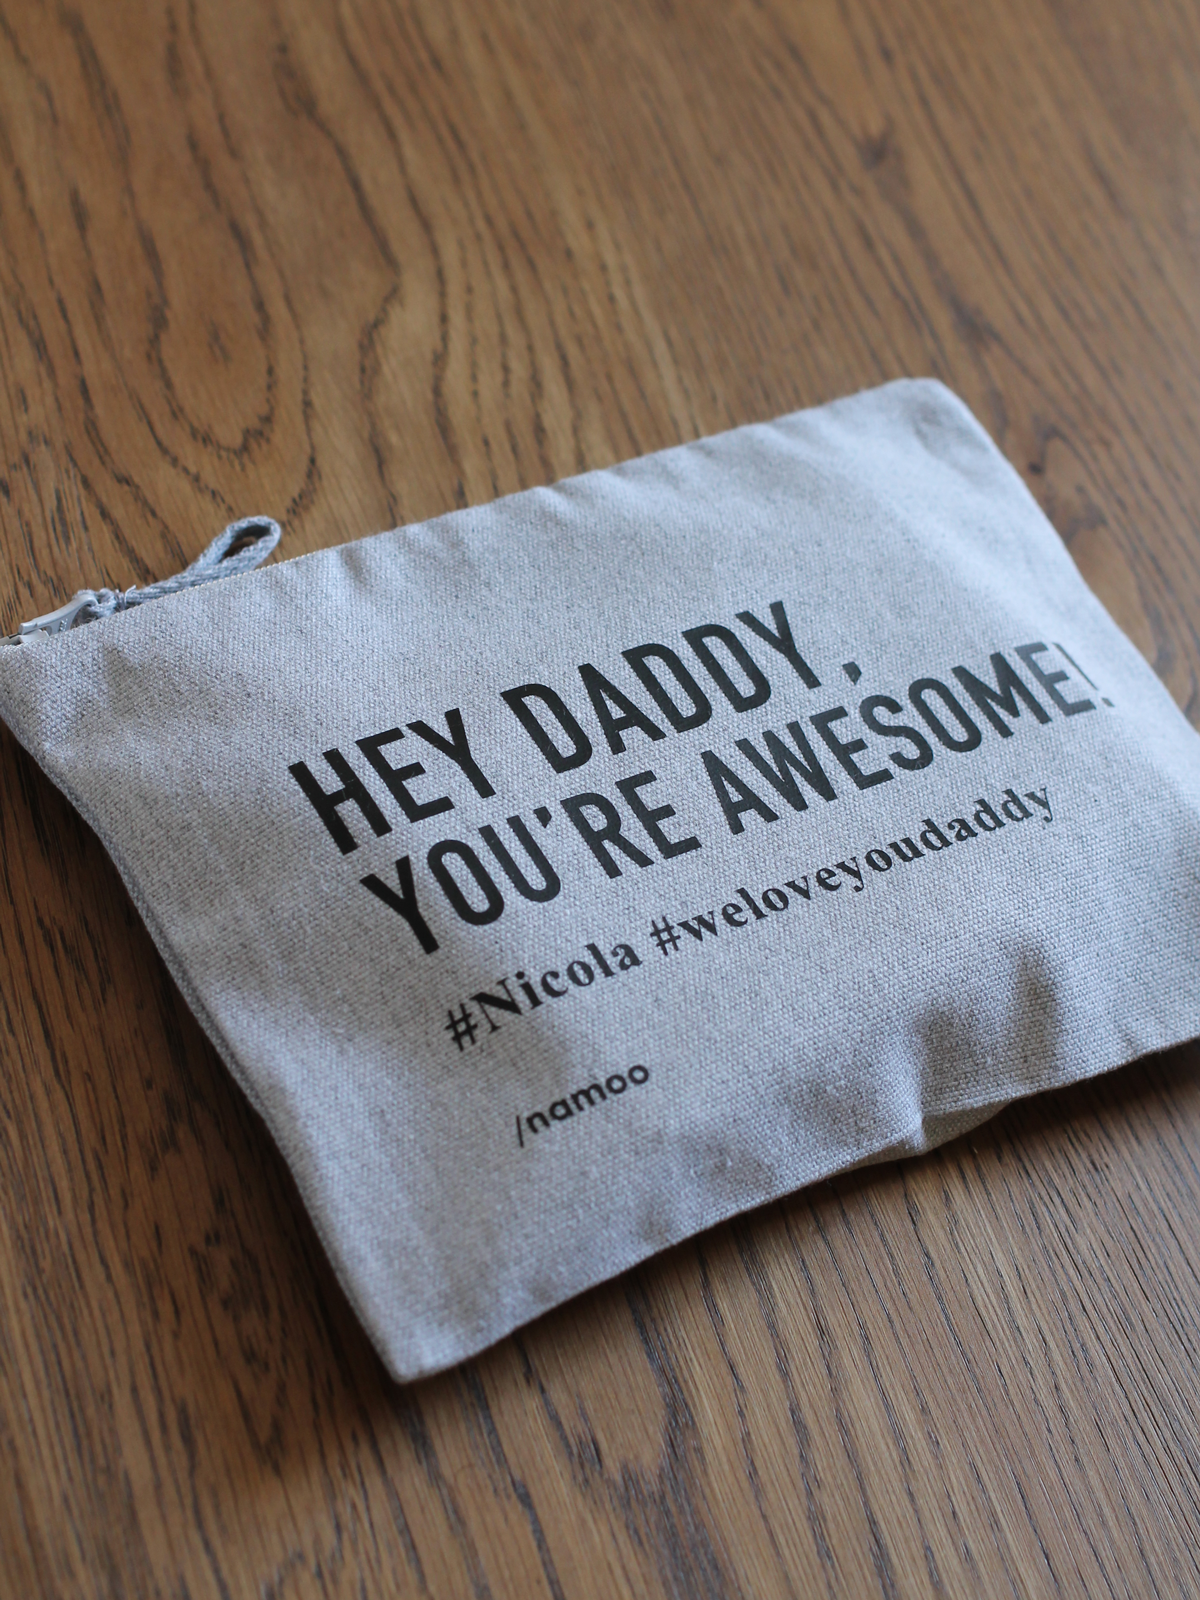 ochette in tela / Hey daddy, you're awesome!